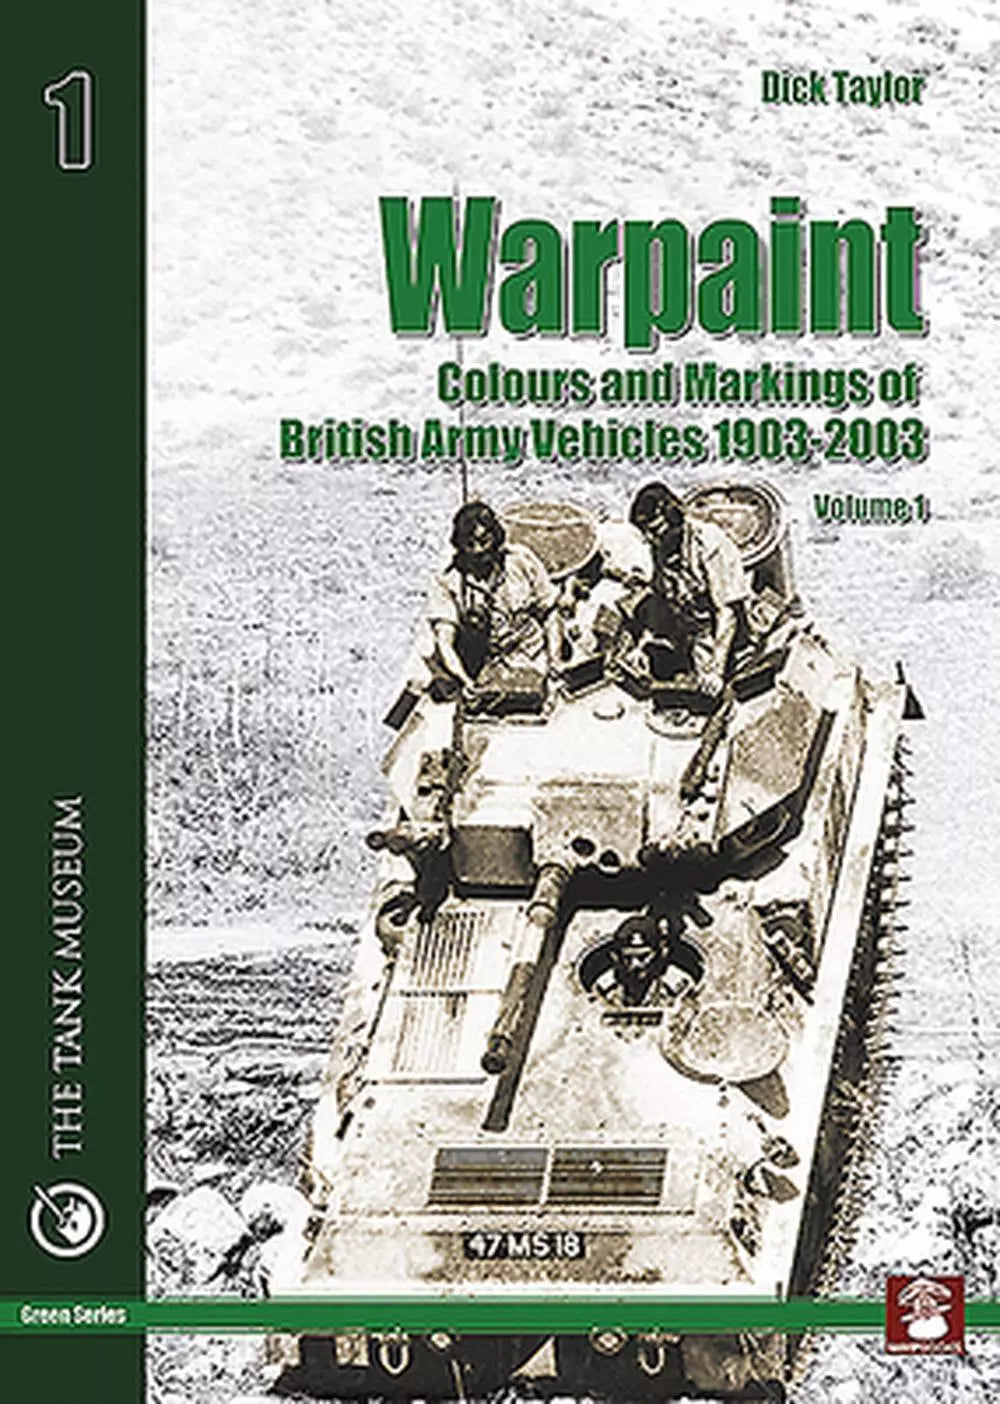 The Tank Museum Warpaint #1 Colours and Markings of British Army Vehilces 1903-2003